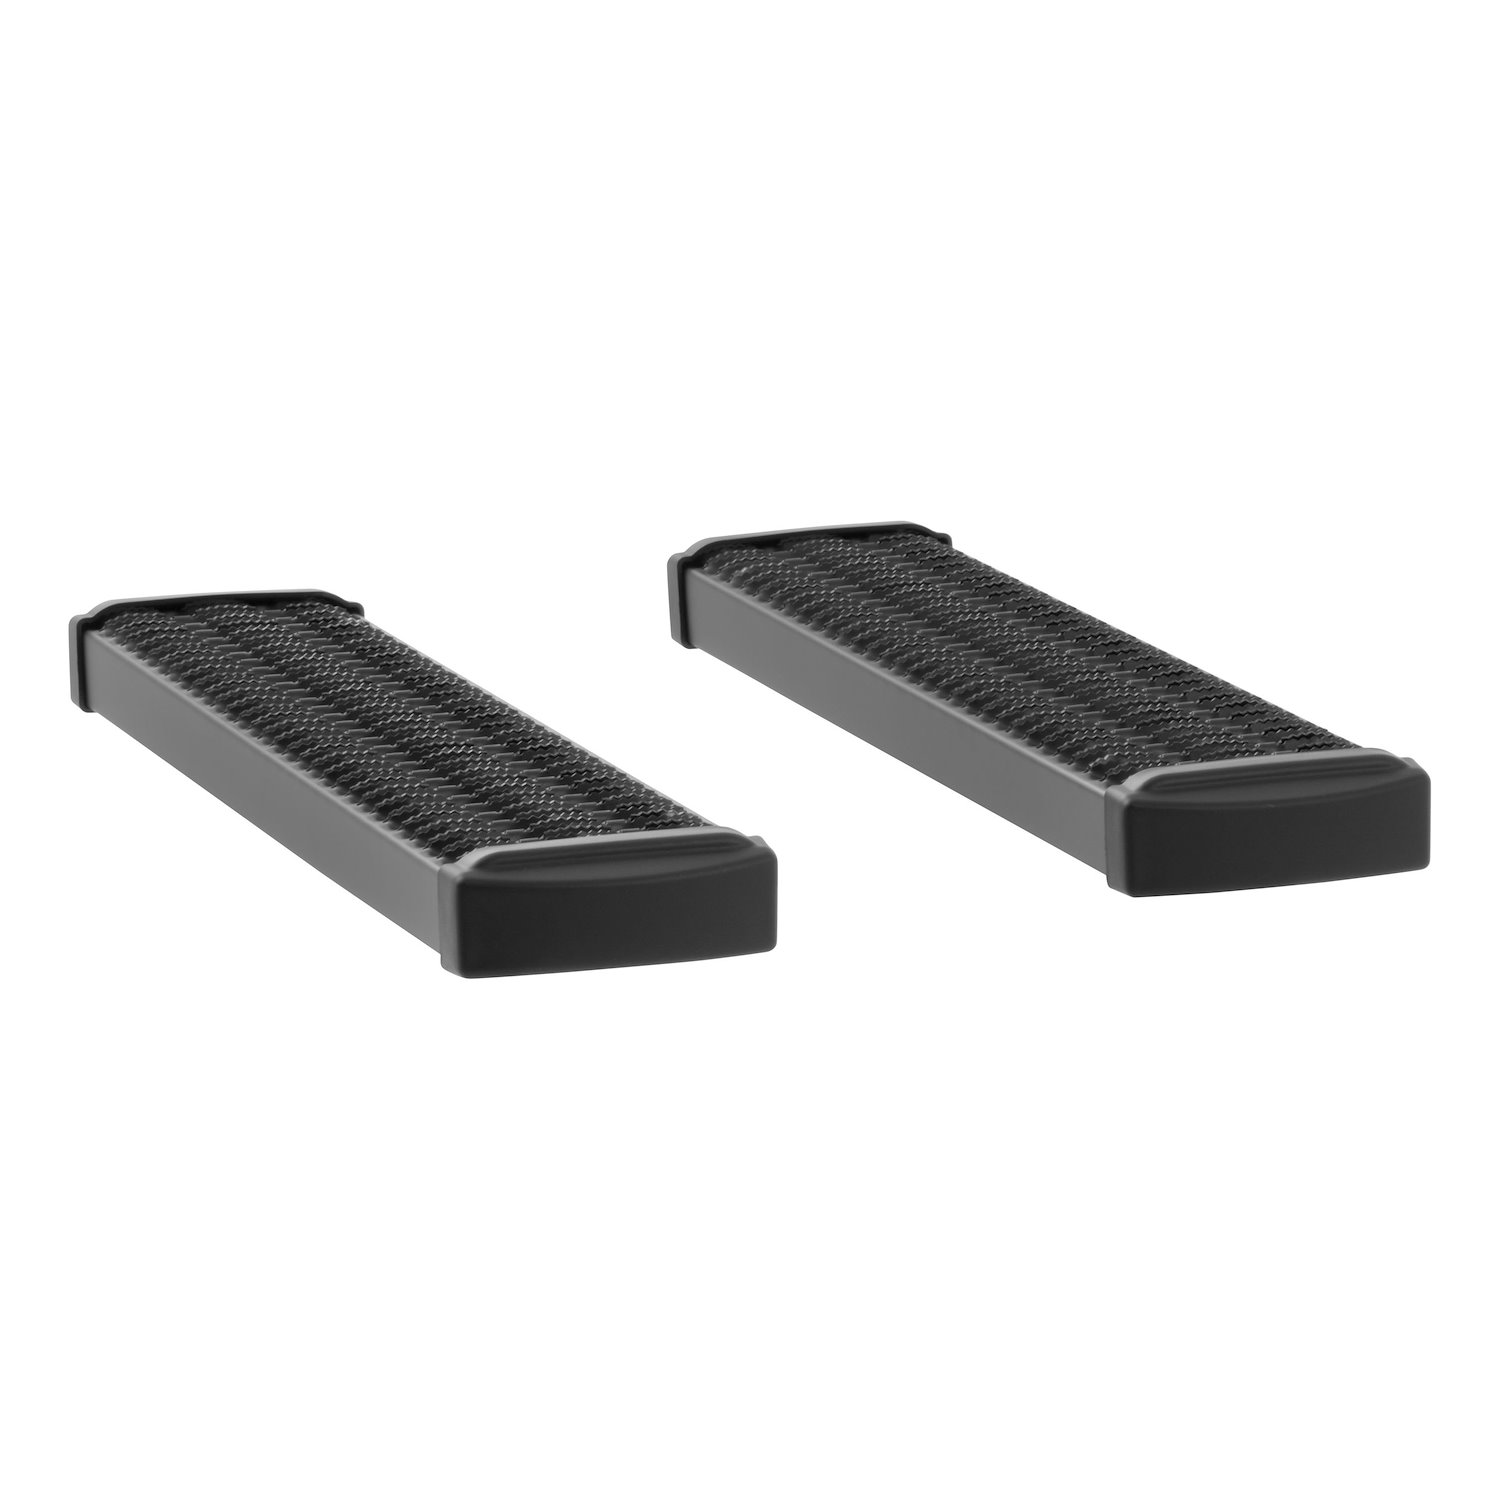 415036-400340 Grip Step 7 in. x 36 in. Black Aluminum Running Boards Fits Select Chevy Express, GMC Savana